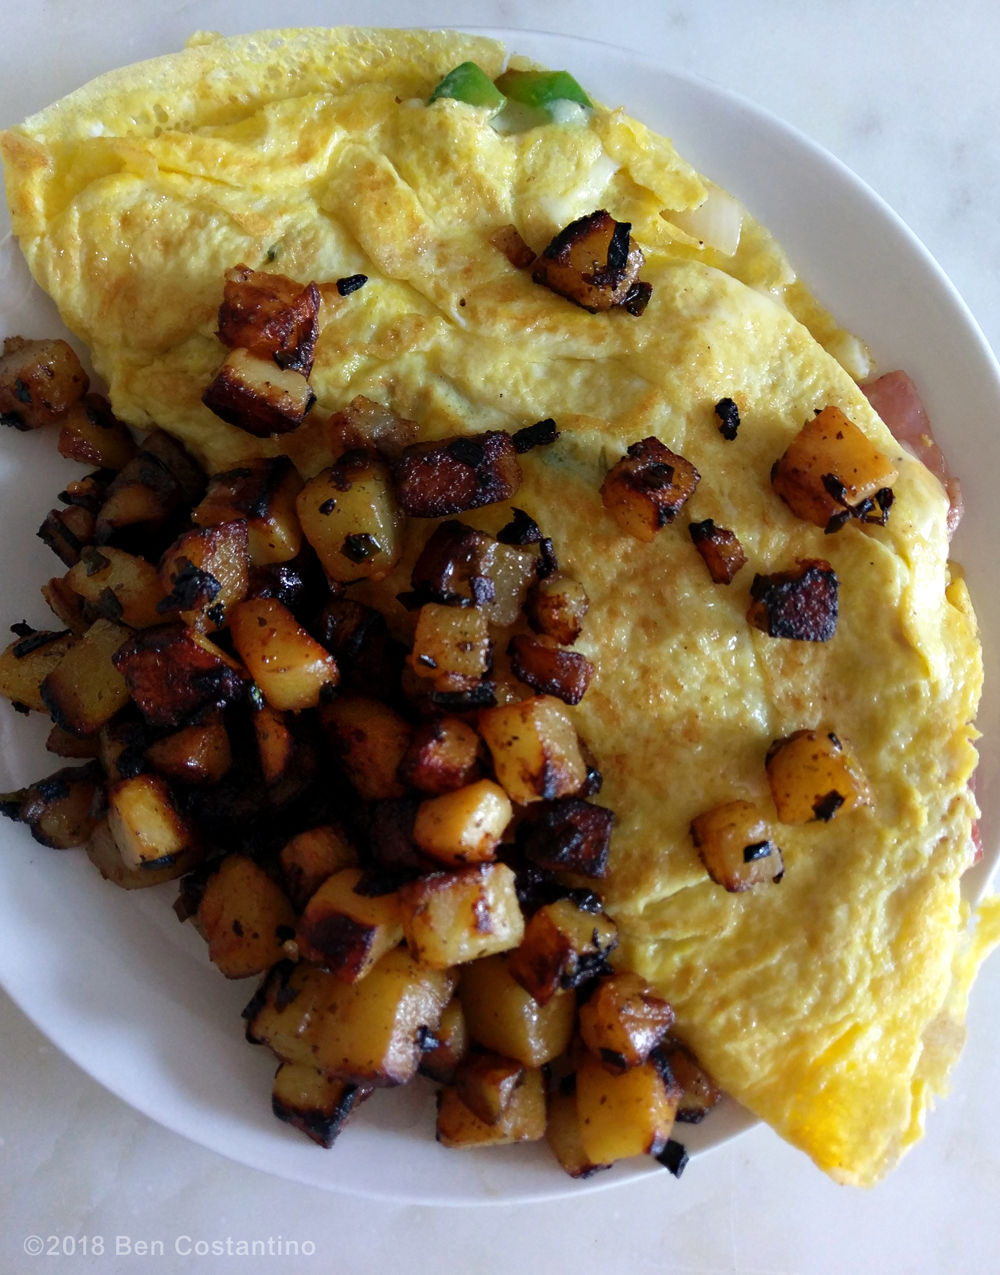 Homefries with a Denver omelette.